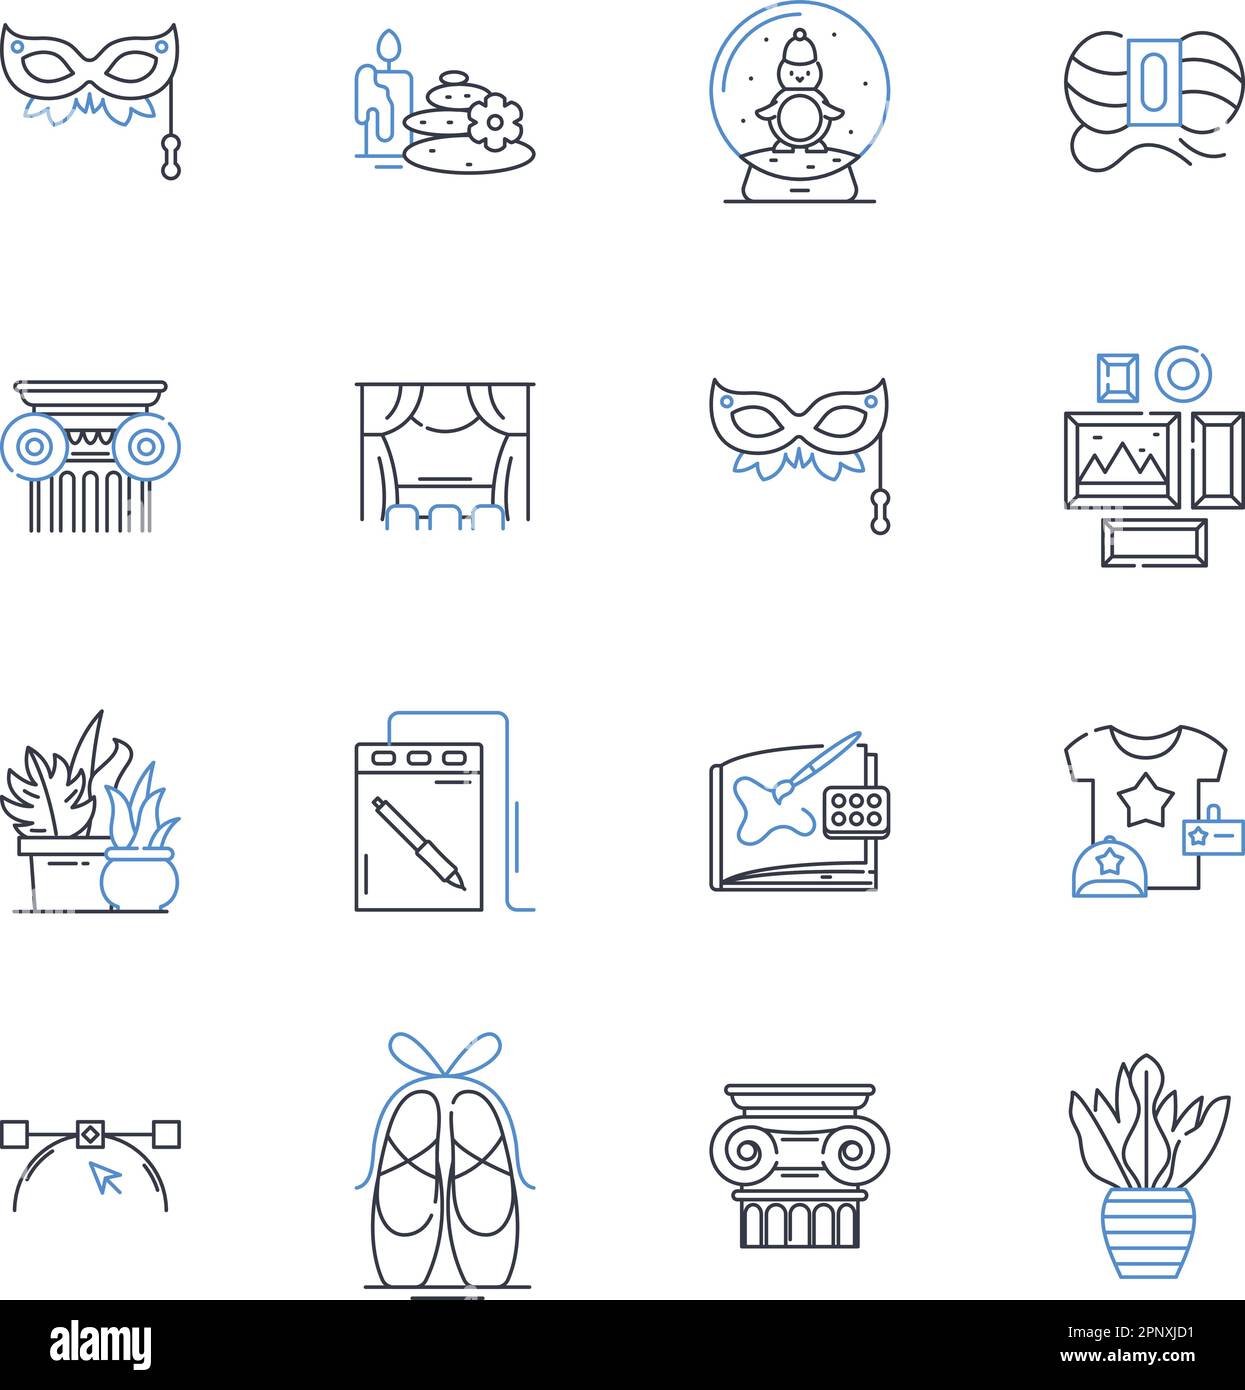 Modern skills line icons collection. Communication, Collaboration ...